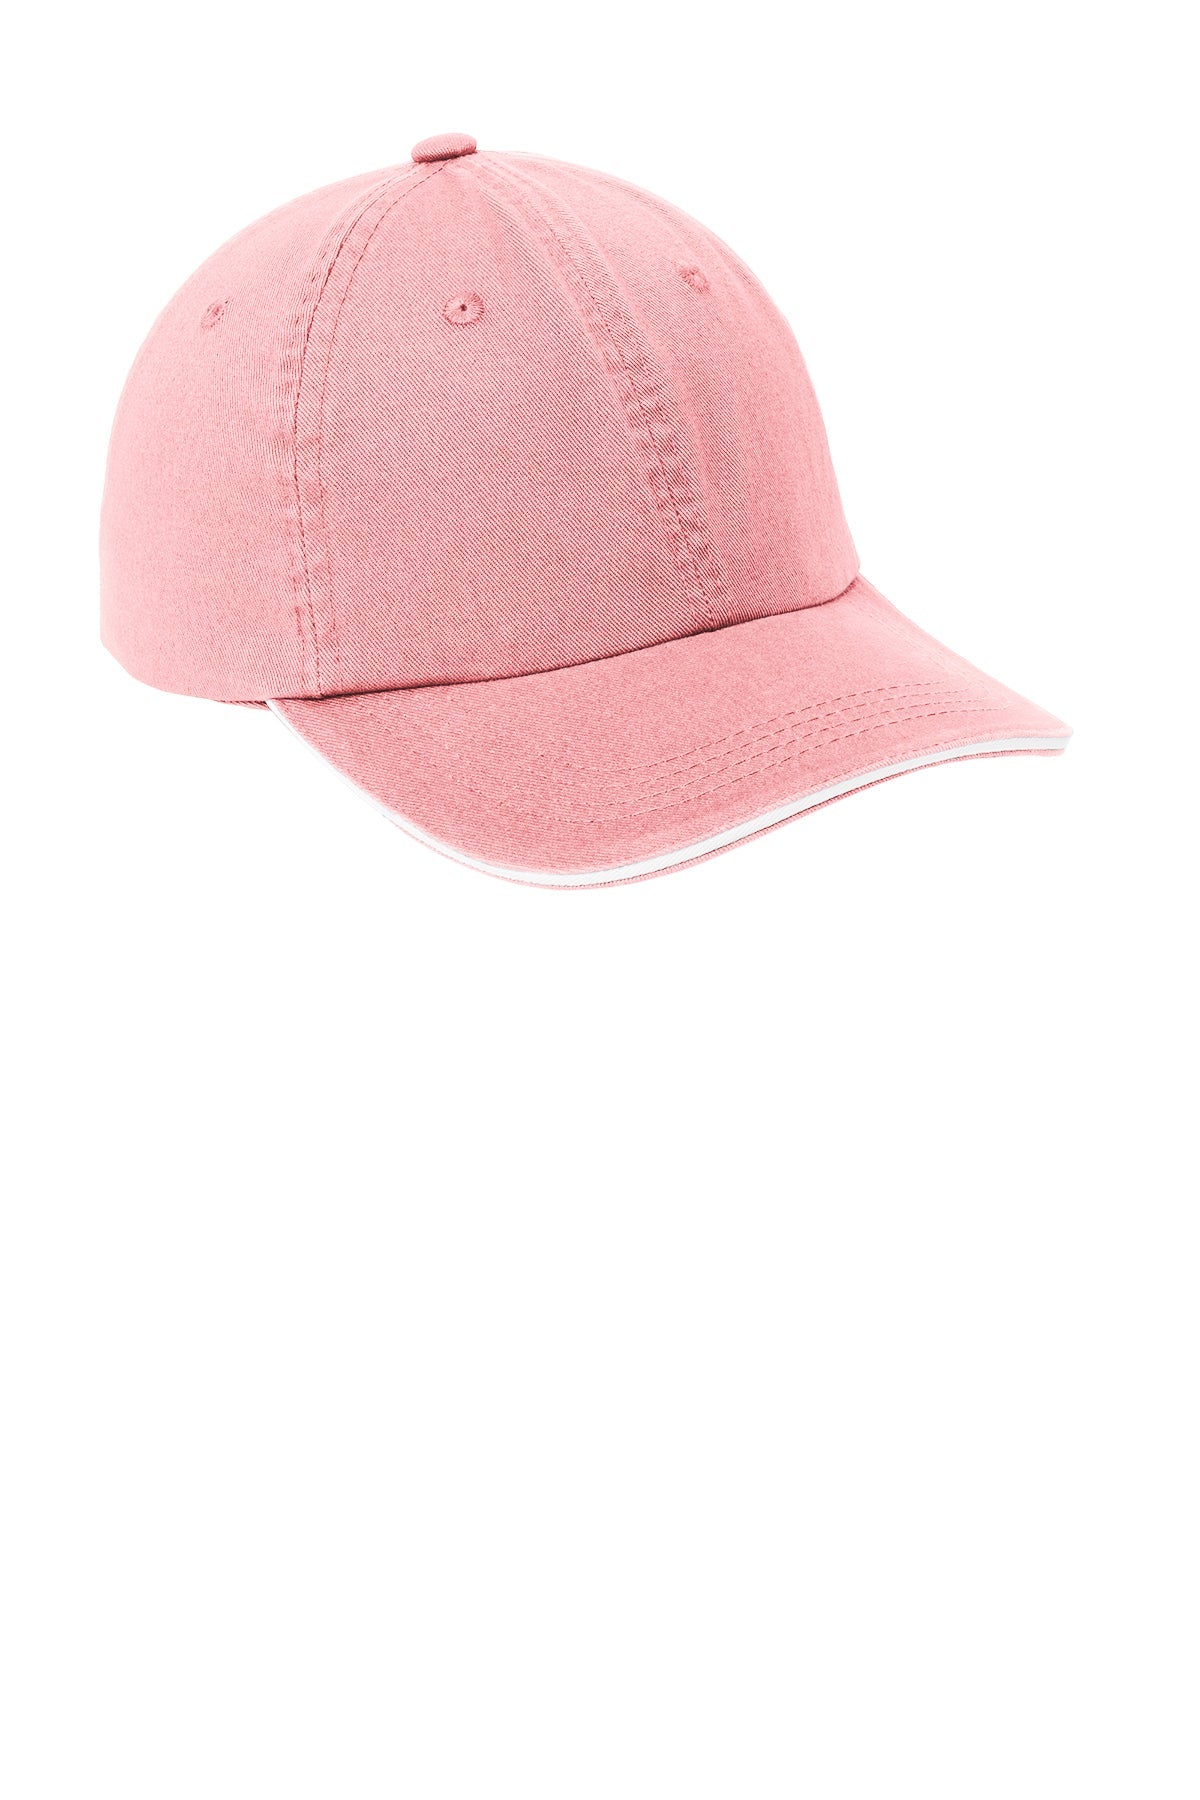 Port Authority Sandwich Bill Custom Caps with Striped Closure, Light Pink/White